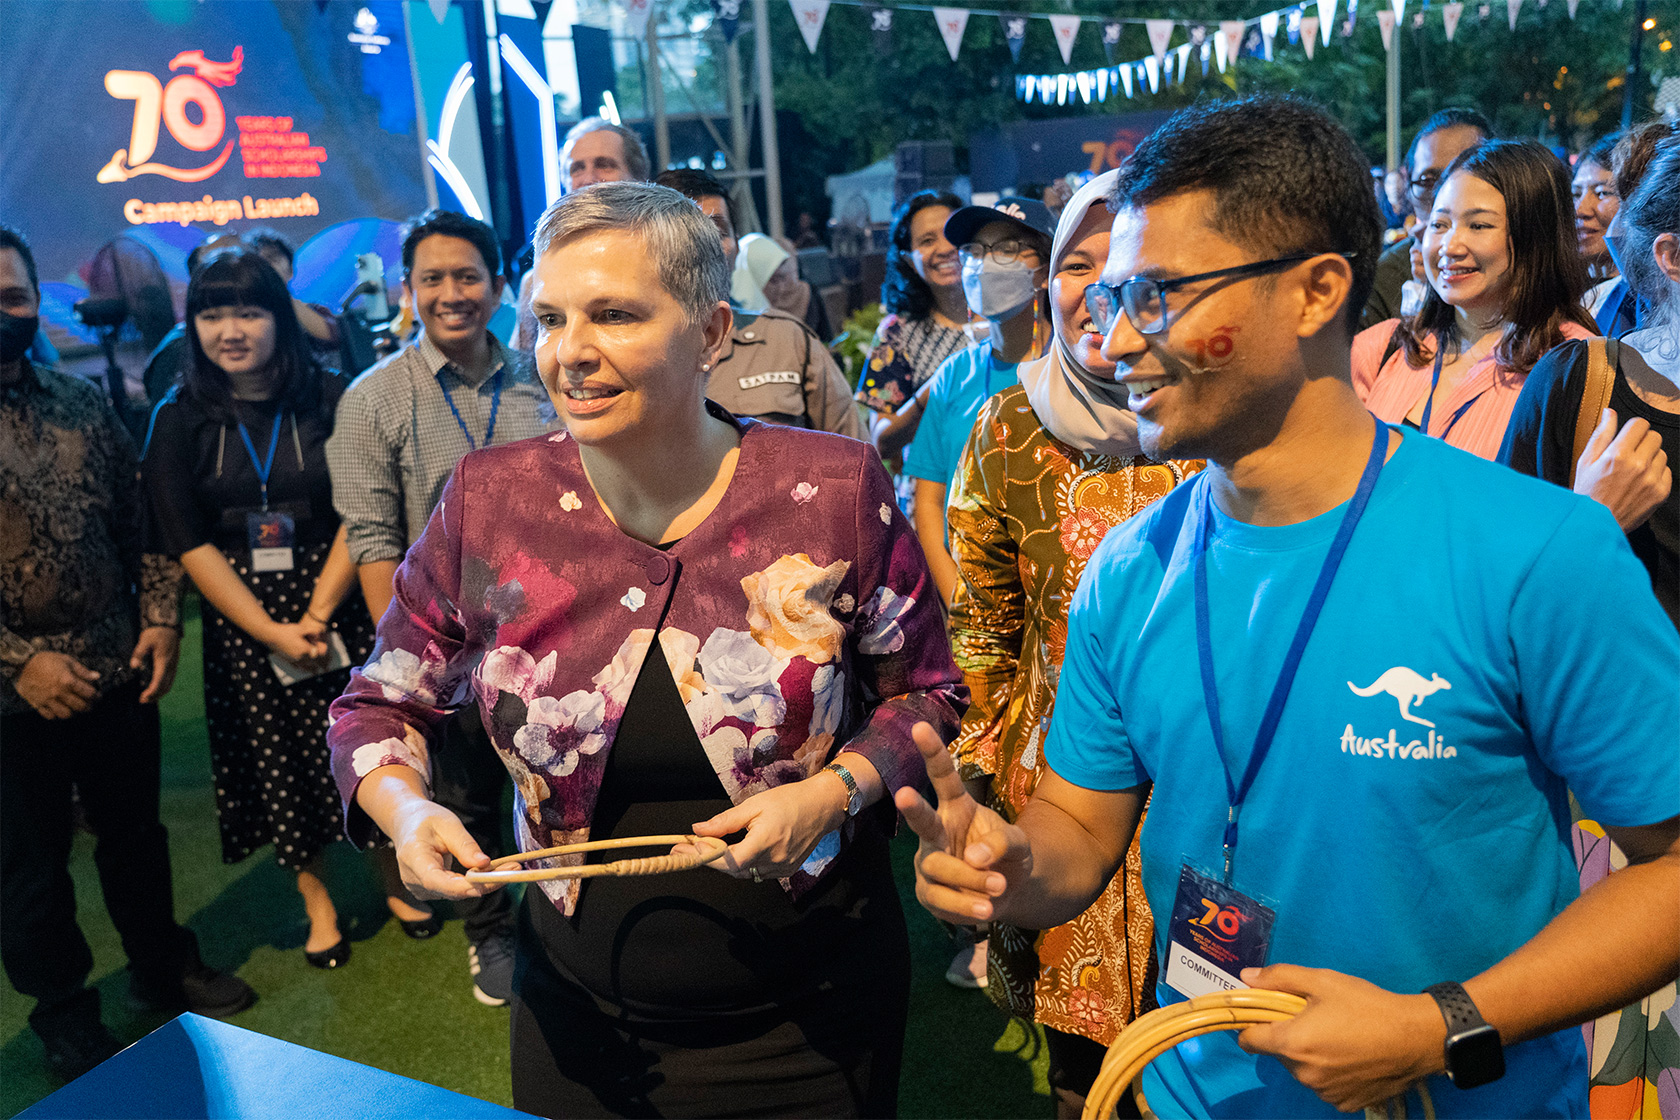 The Australian Ambassador to Indonesia tried several fun games, including ring toss.